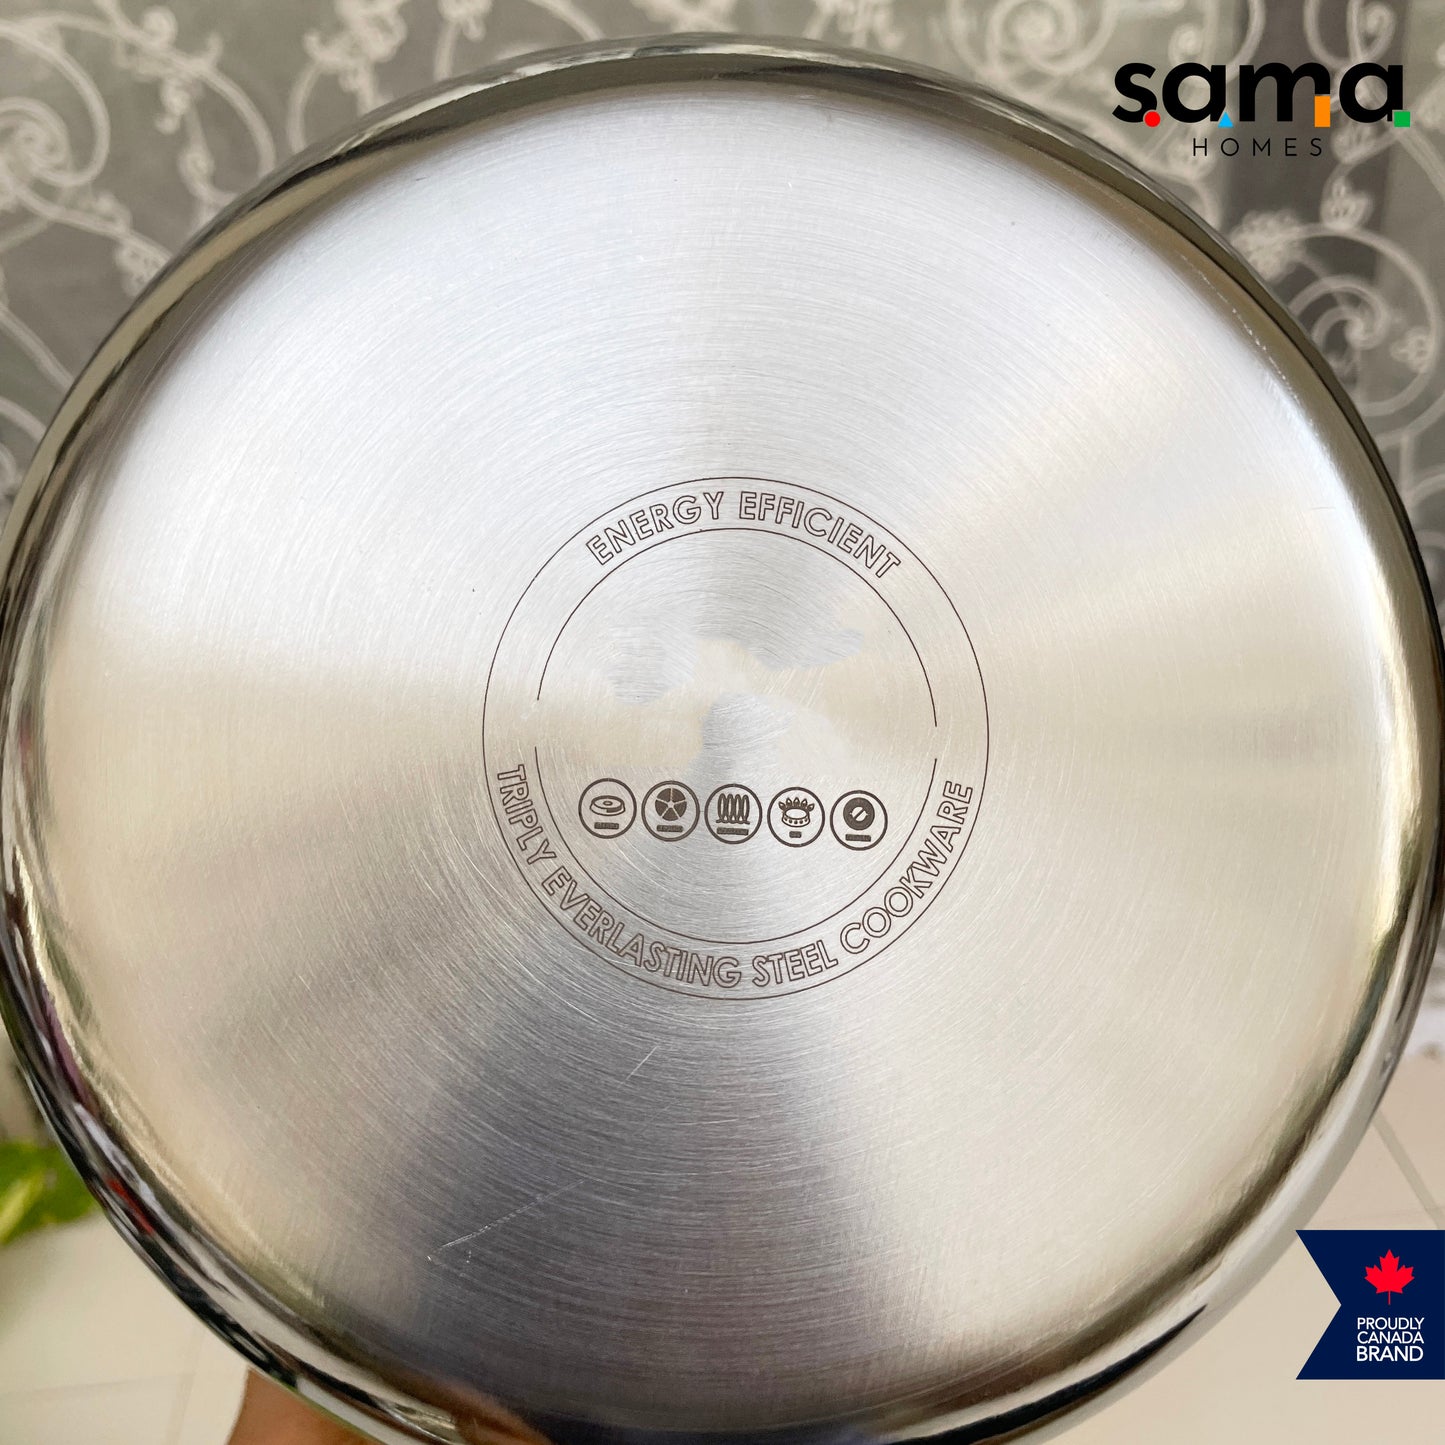 Stainless Steel Triply Cookware